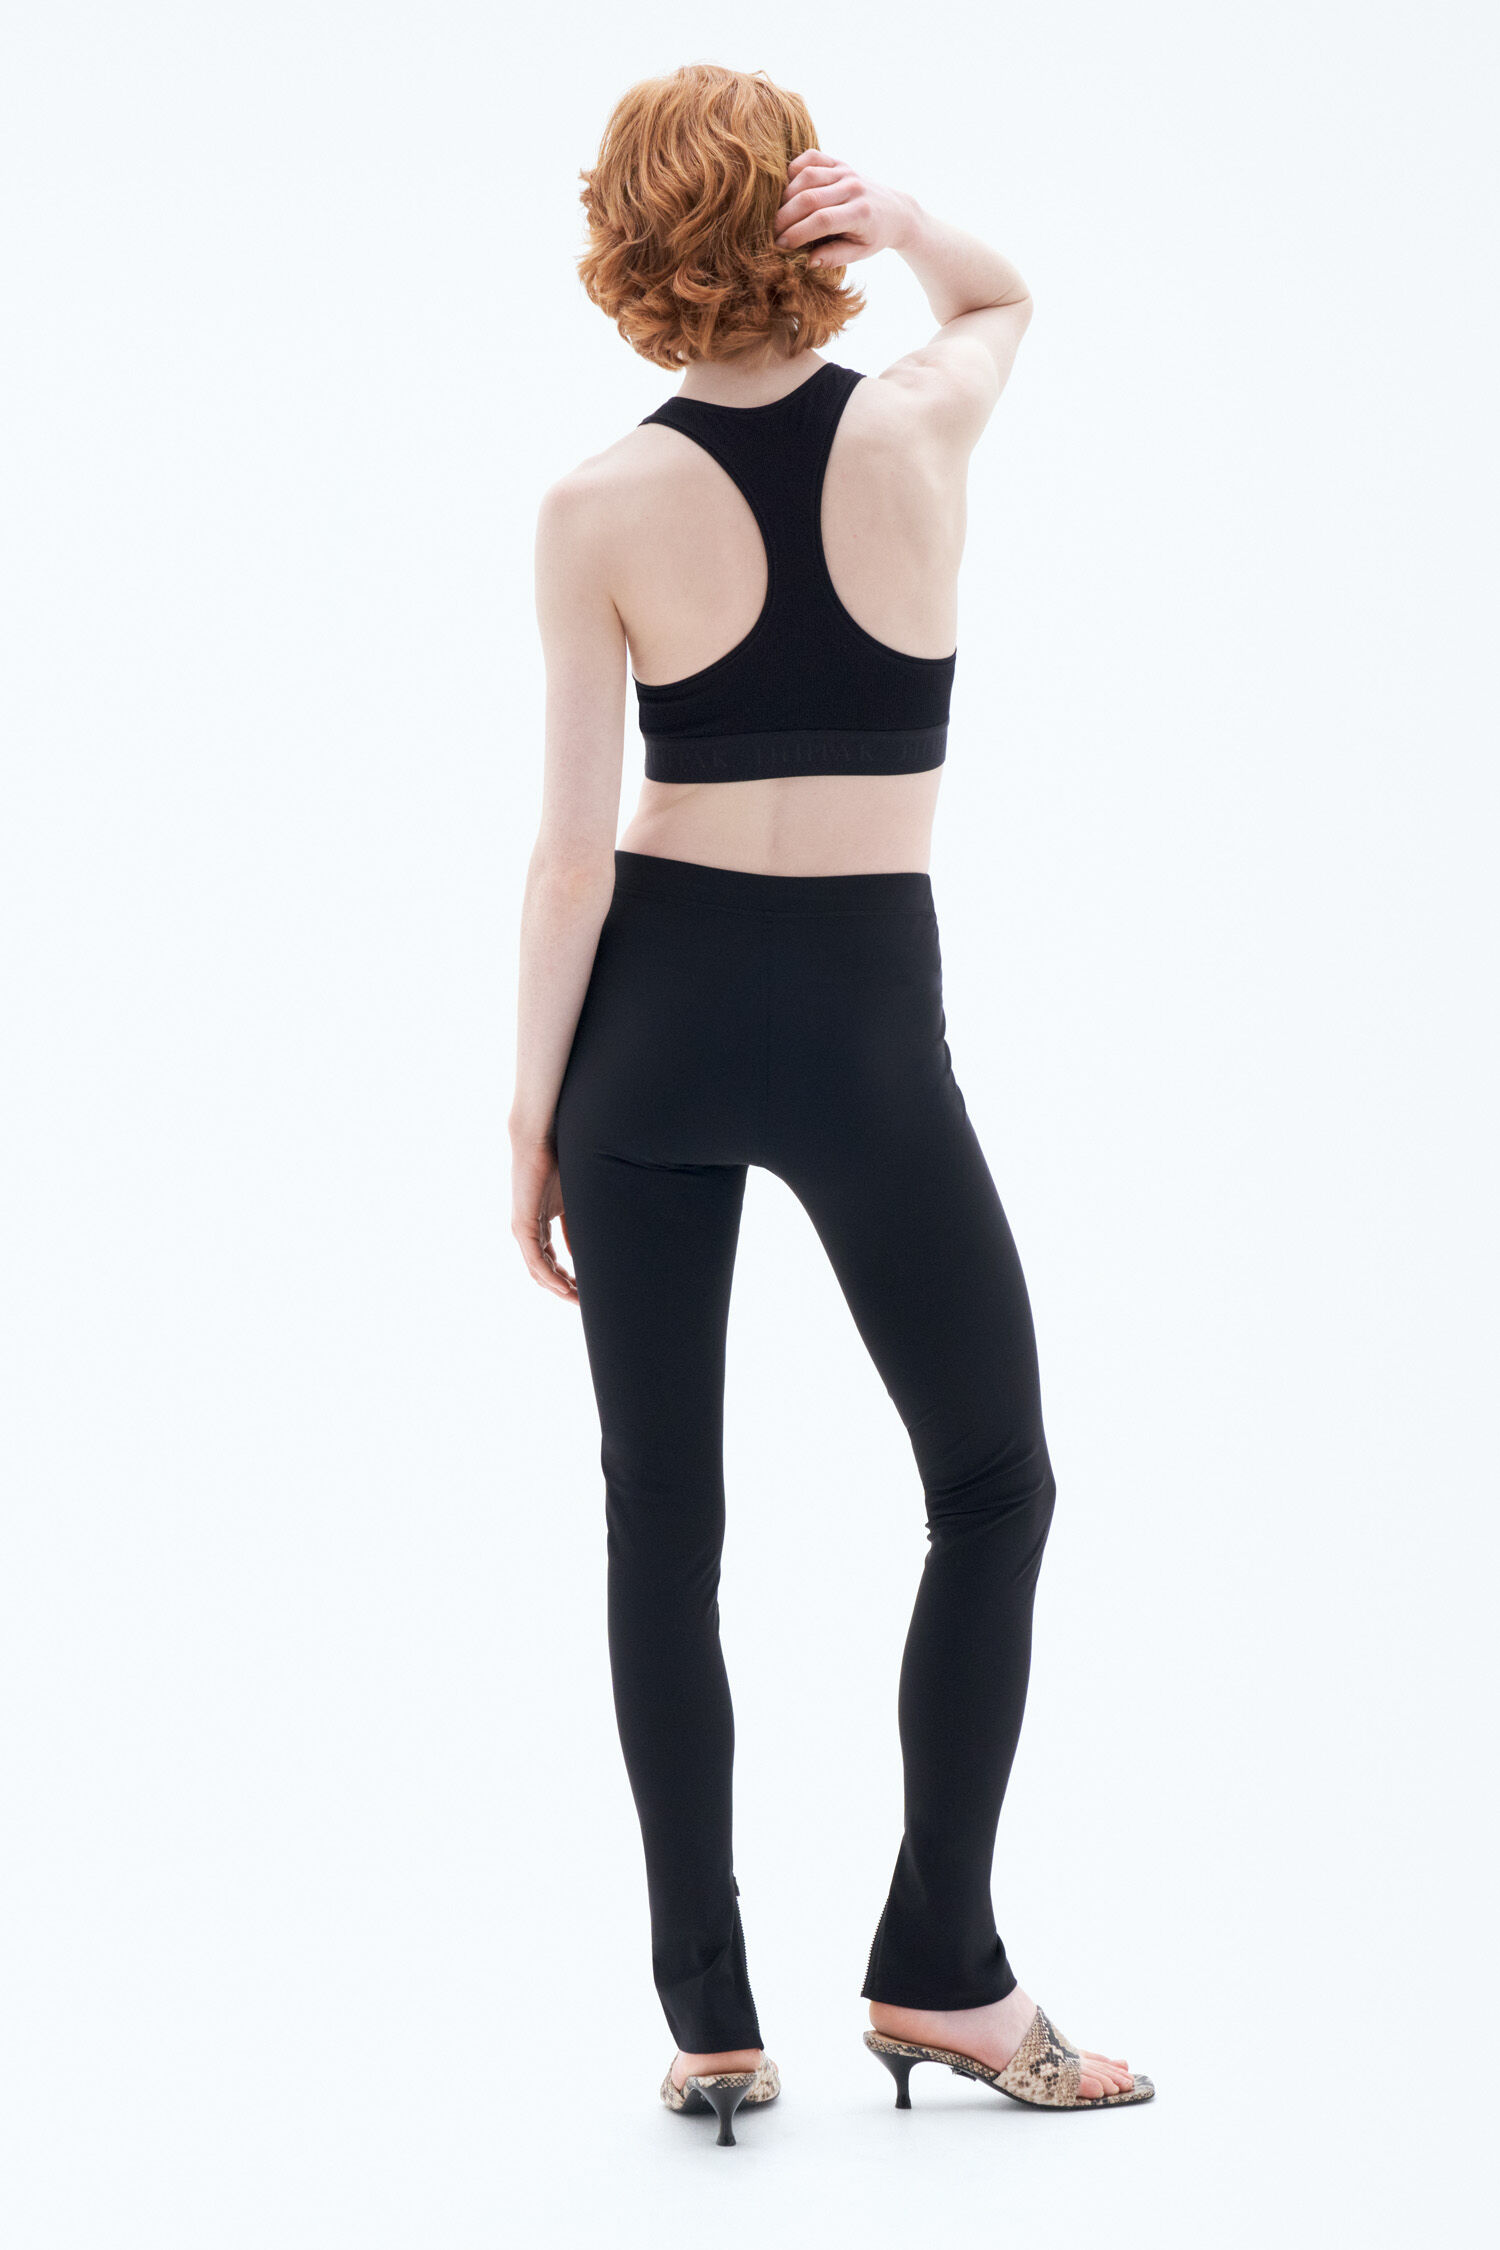 20% off Bras and Leggings At Least 20% Sustainable Material Sports Bras.